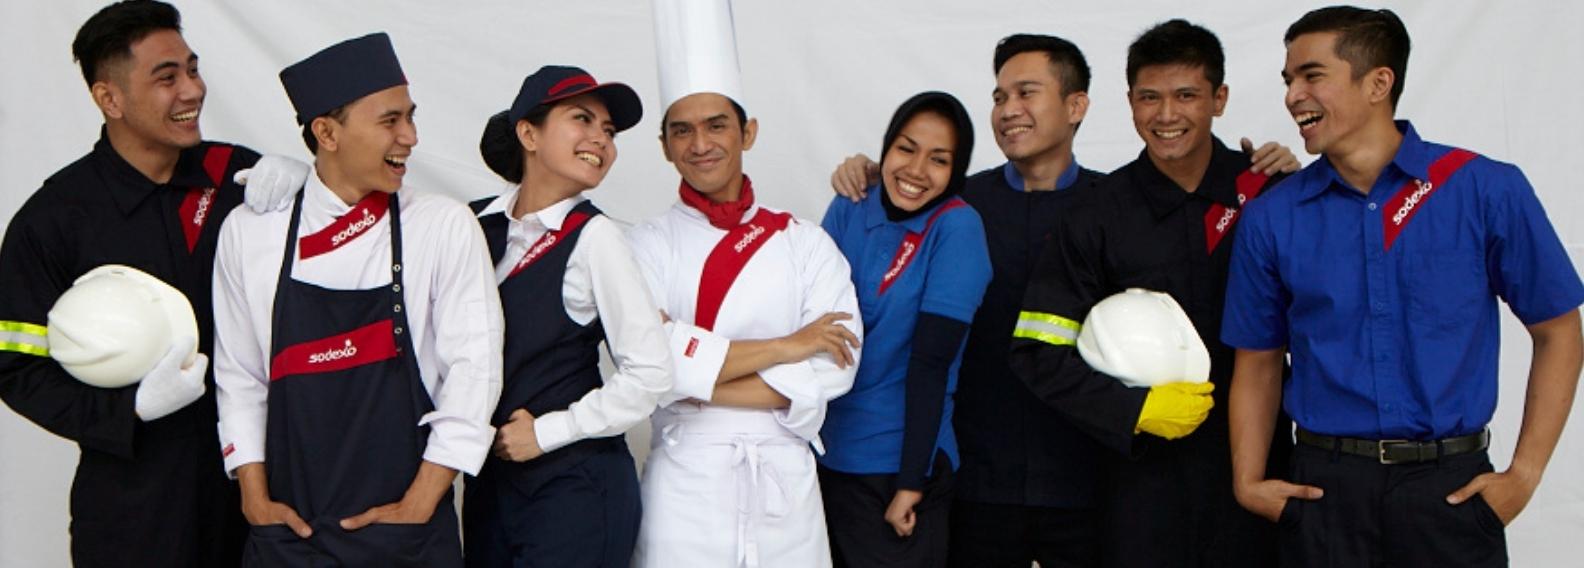 Welcome to Sodexo, Philippines!